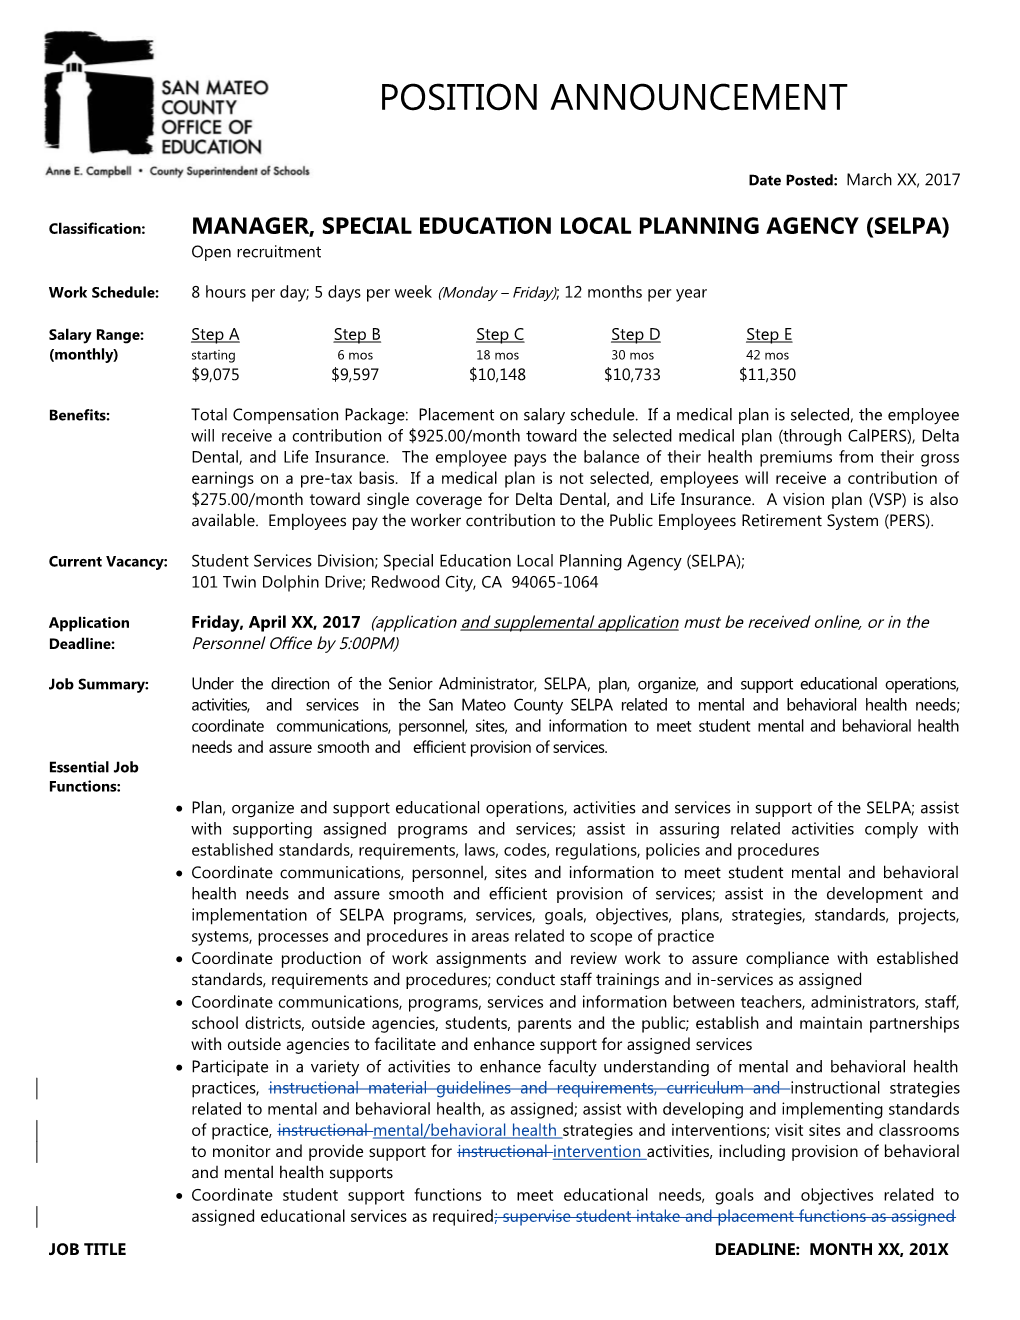 Classification:MANAGER, SPECIAL EDUCATION LOCAL PLANNING AGENCY (SELPA)